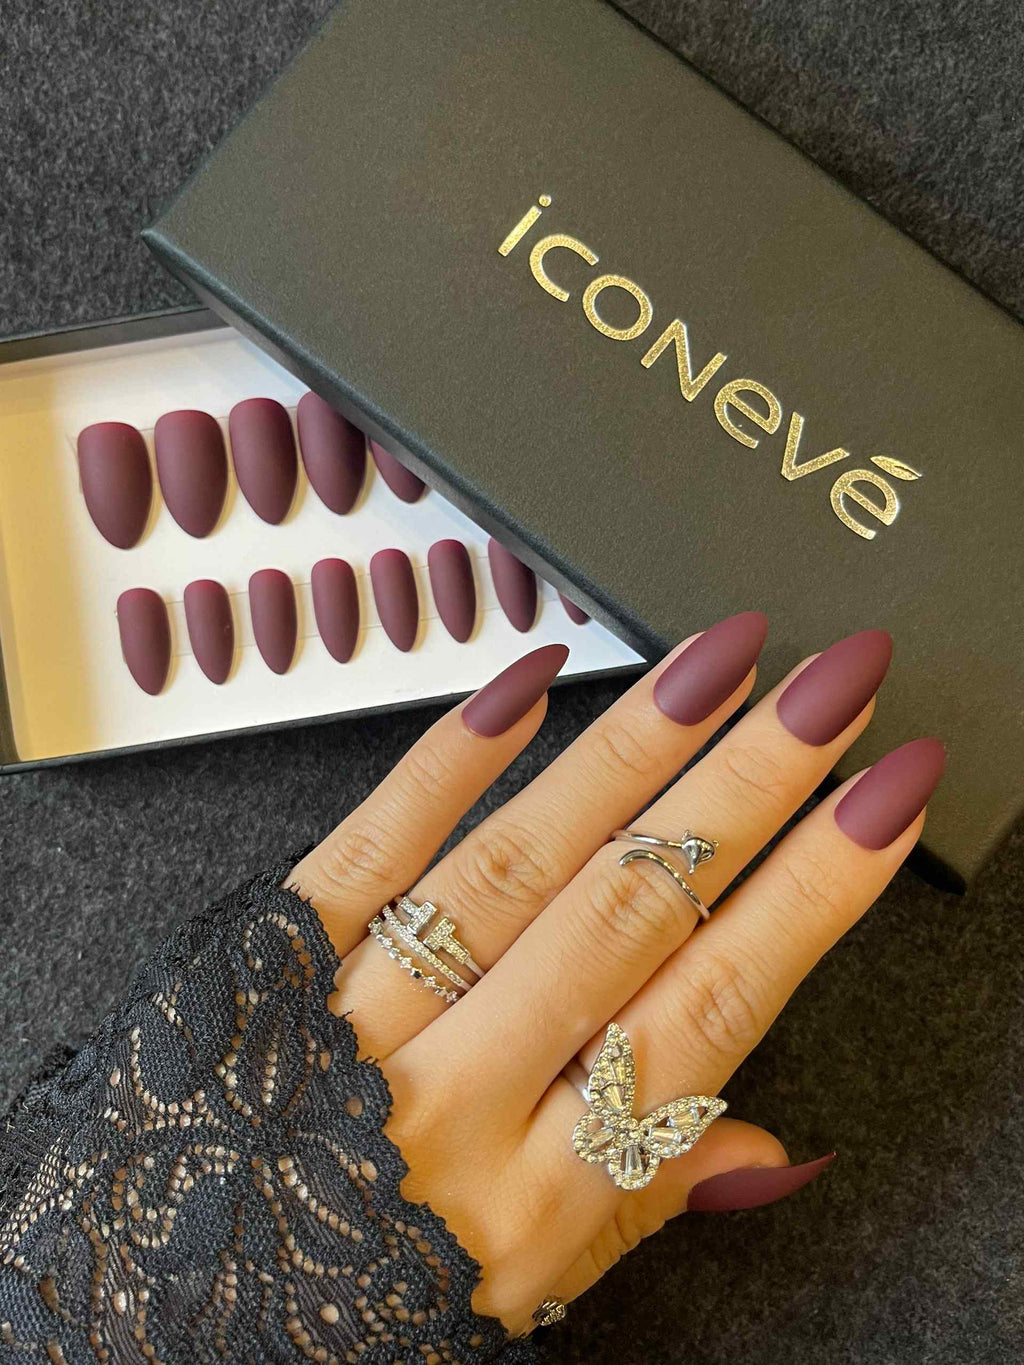 10 Burgundy Nail Ideas To Inspire Your Next Fall Manicure